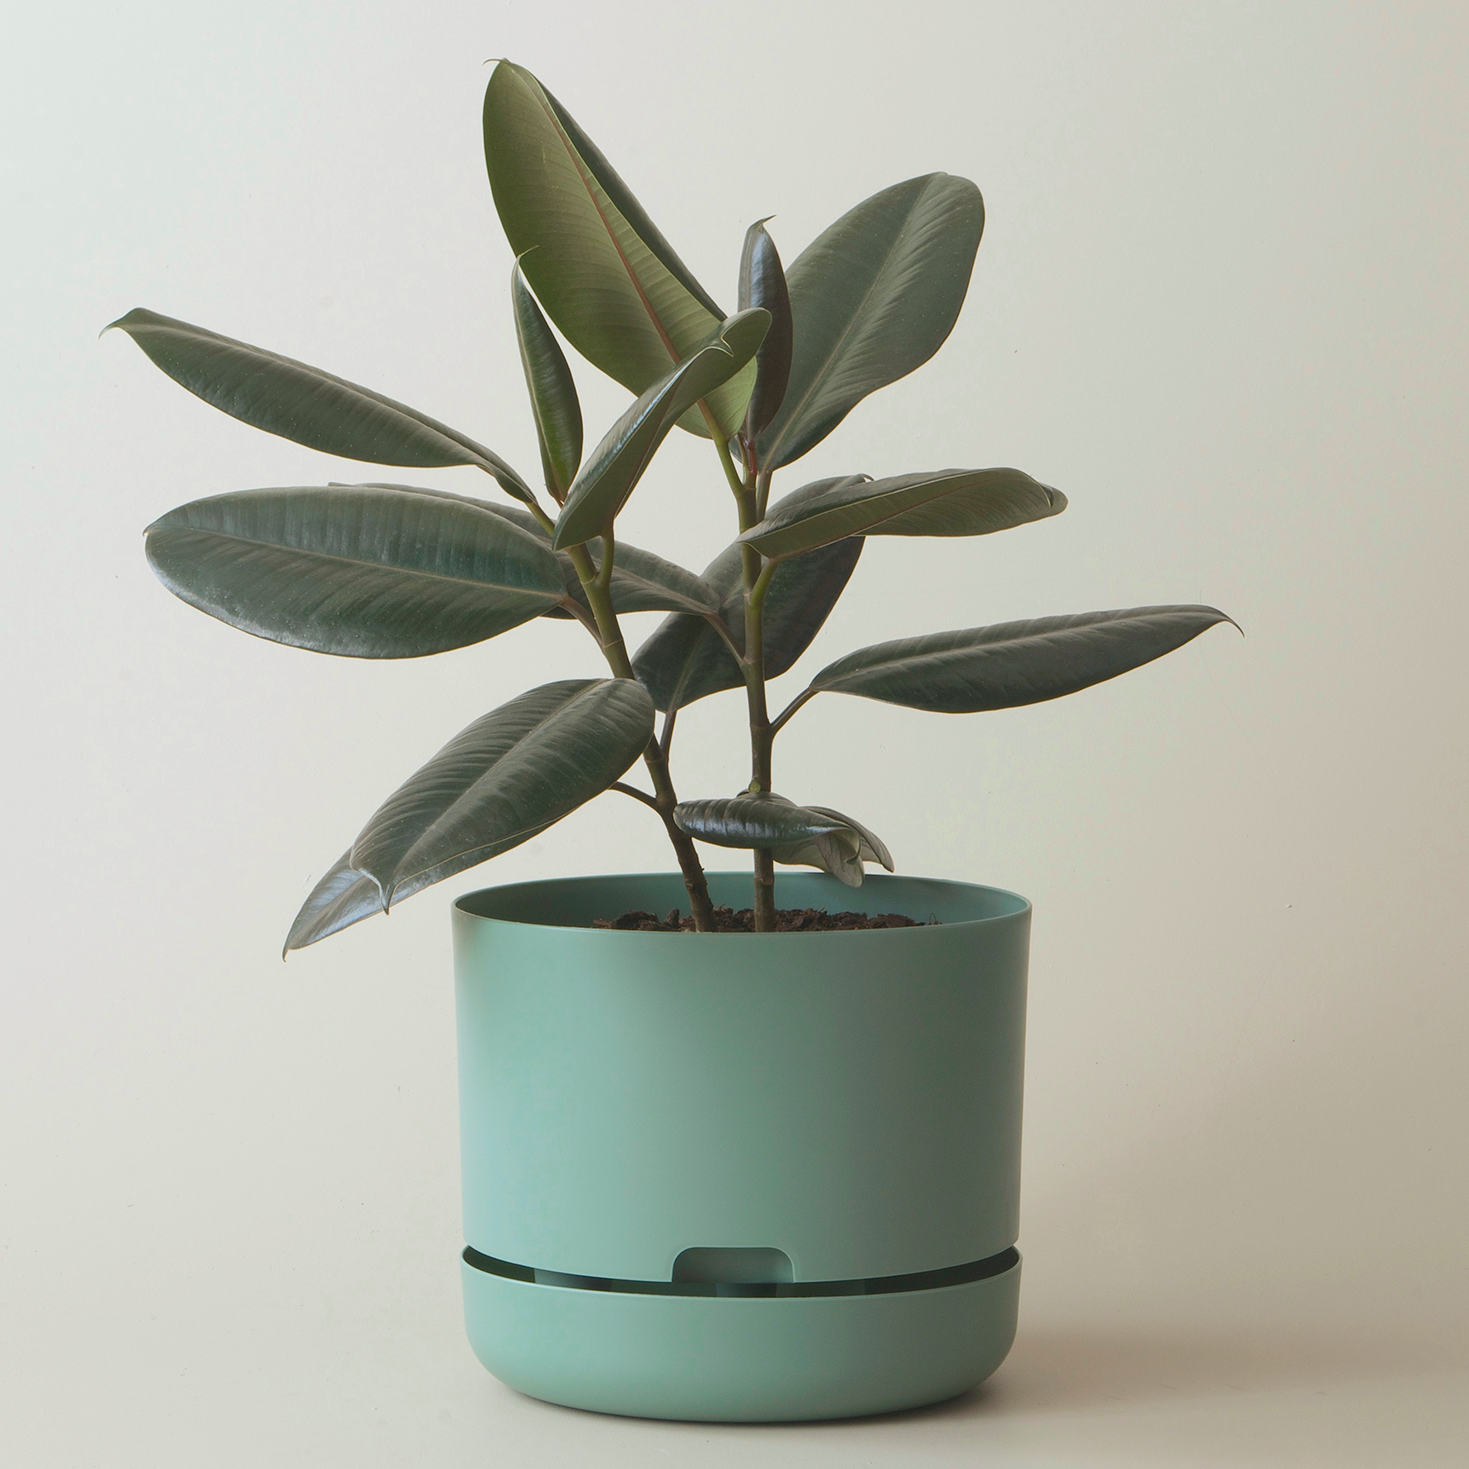 Mr Kitly Selfwatering Plant Pot, Cabinet Green